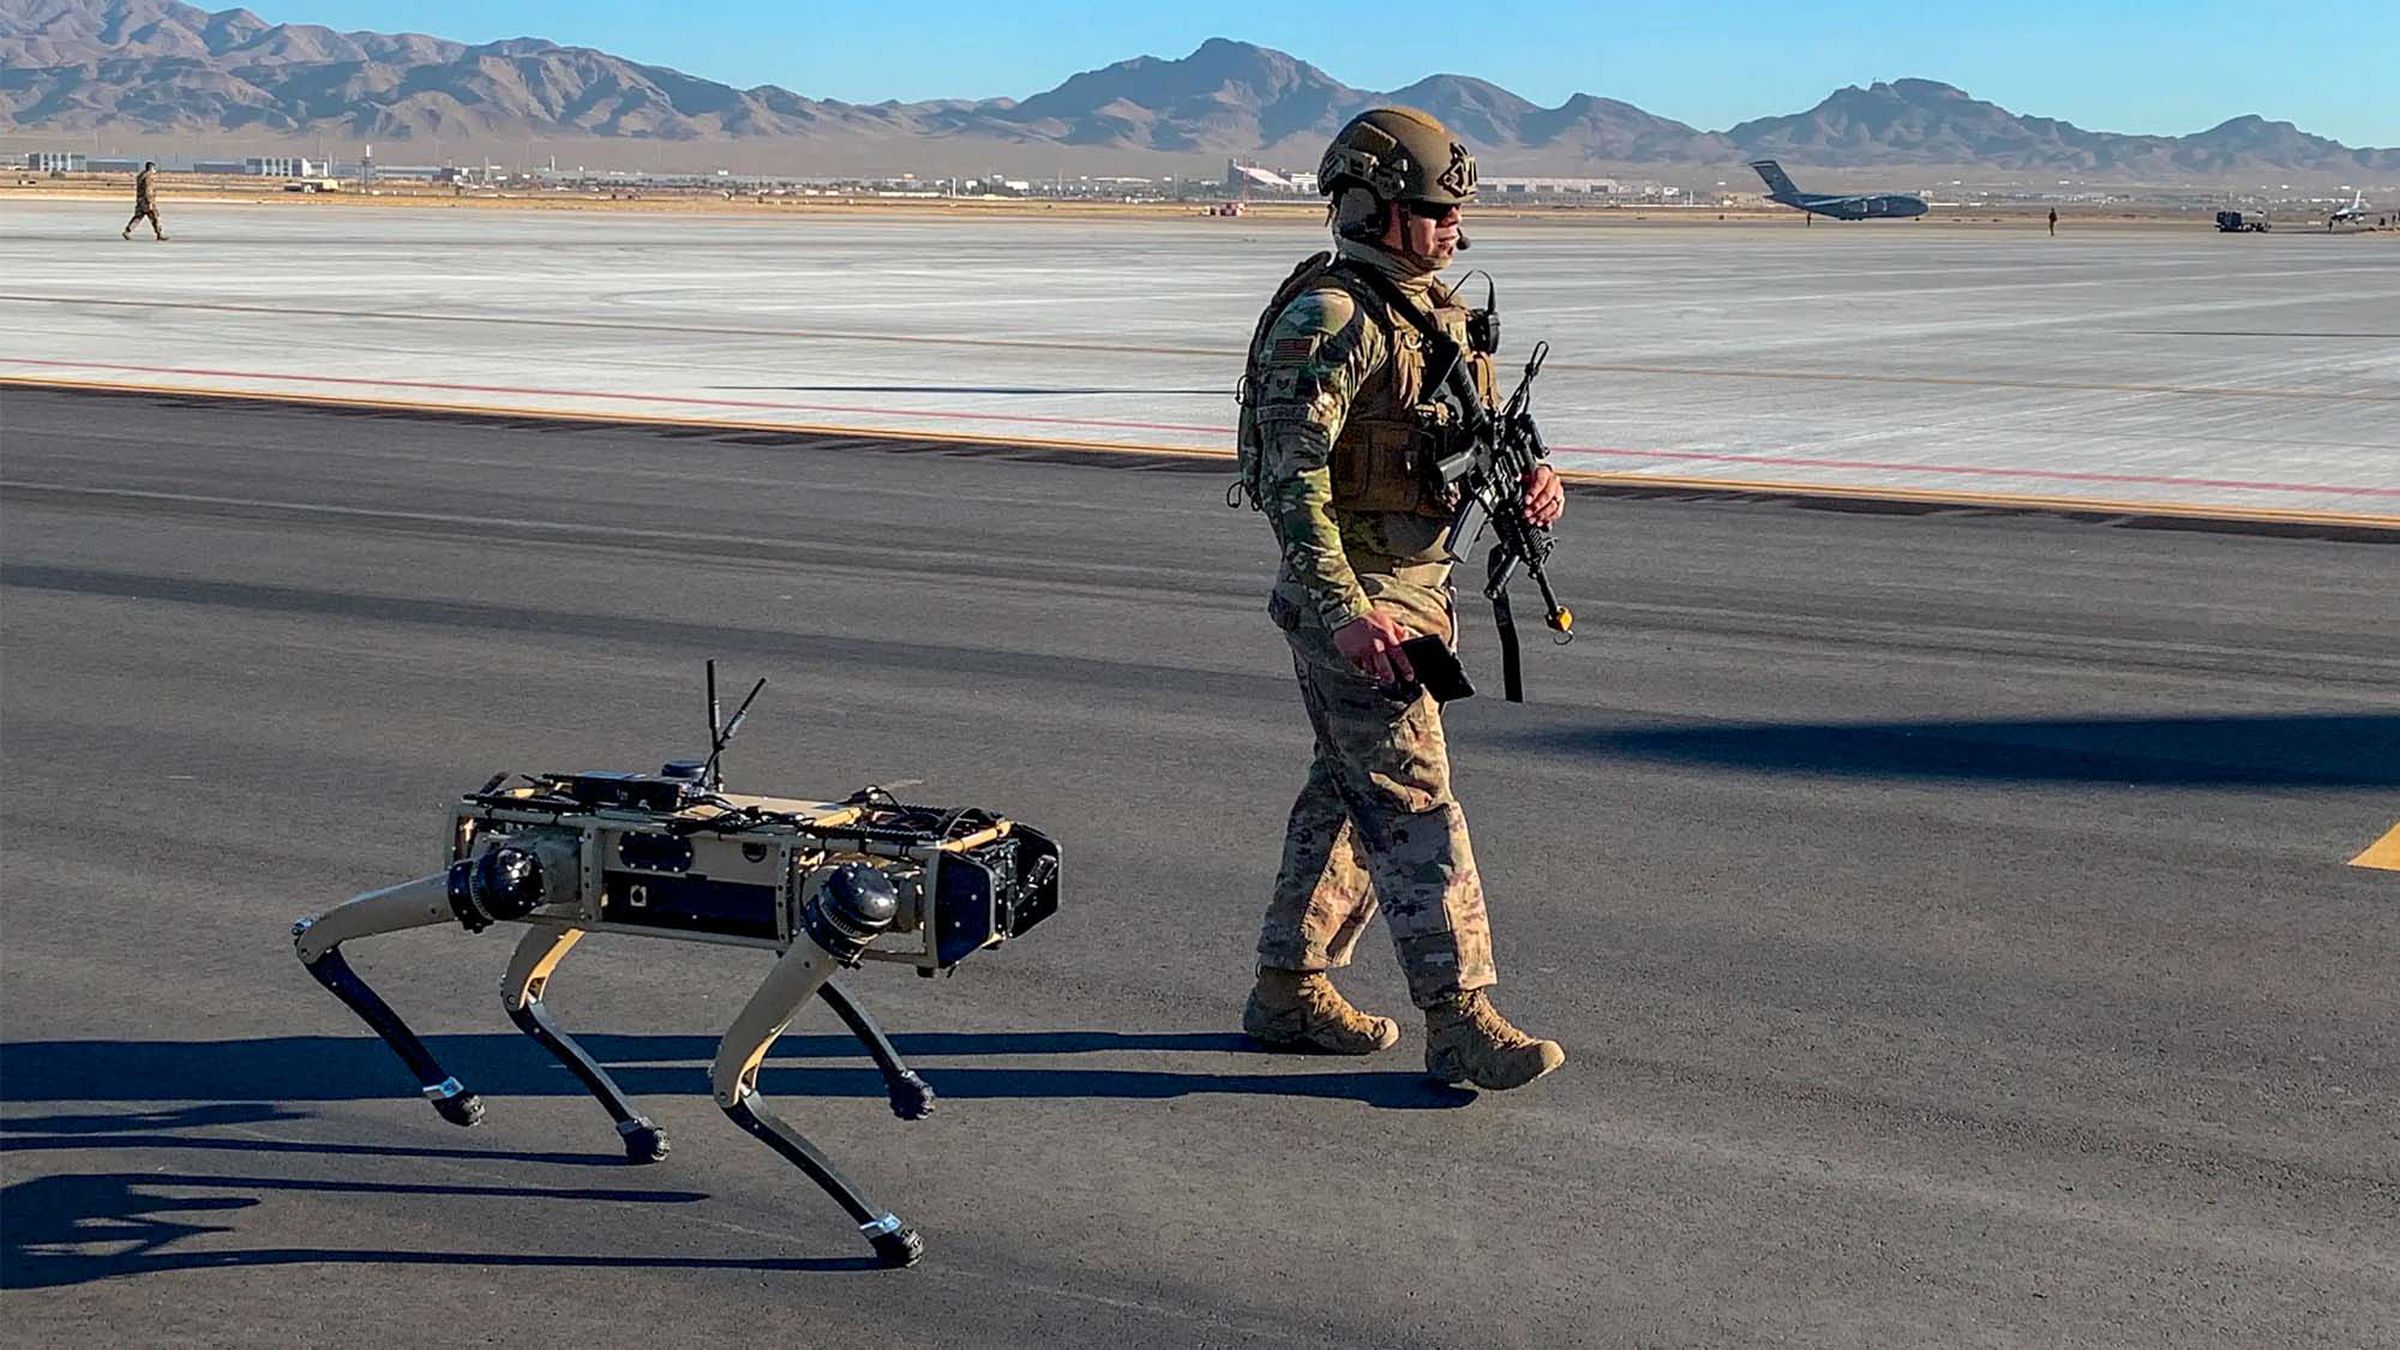 A photograph of a quadrupedal robot the size of a dog walking alongside an armed member of the Air Force on a US military base. 